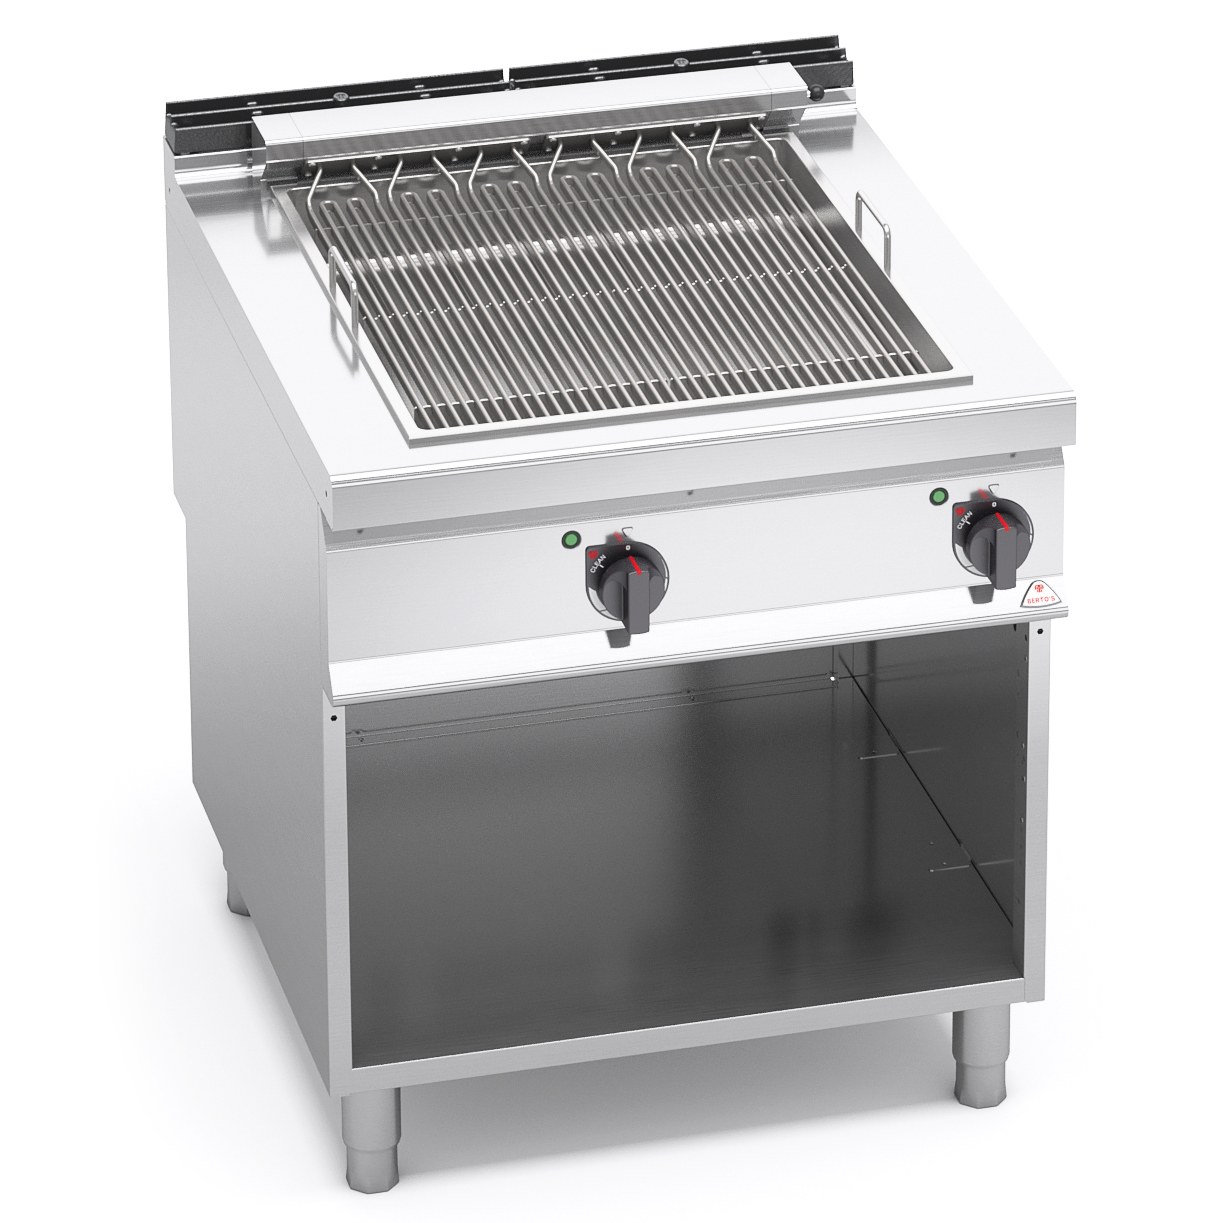 STANDING ELECTRIC GRILL - 20155600 - Commercial kitchens